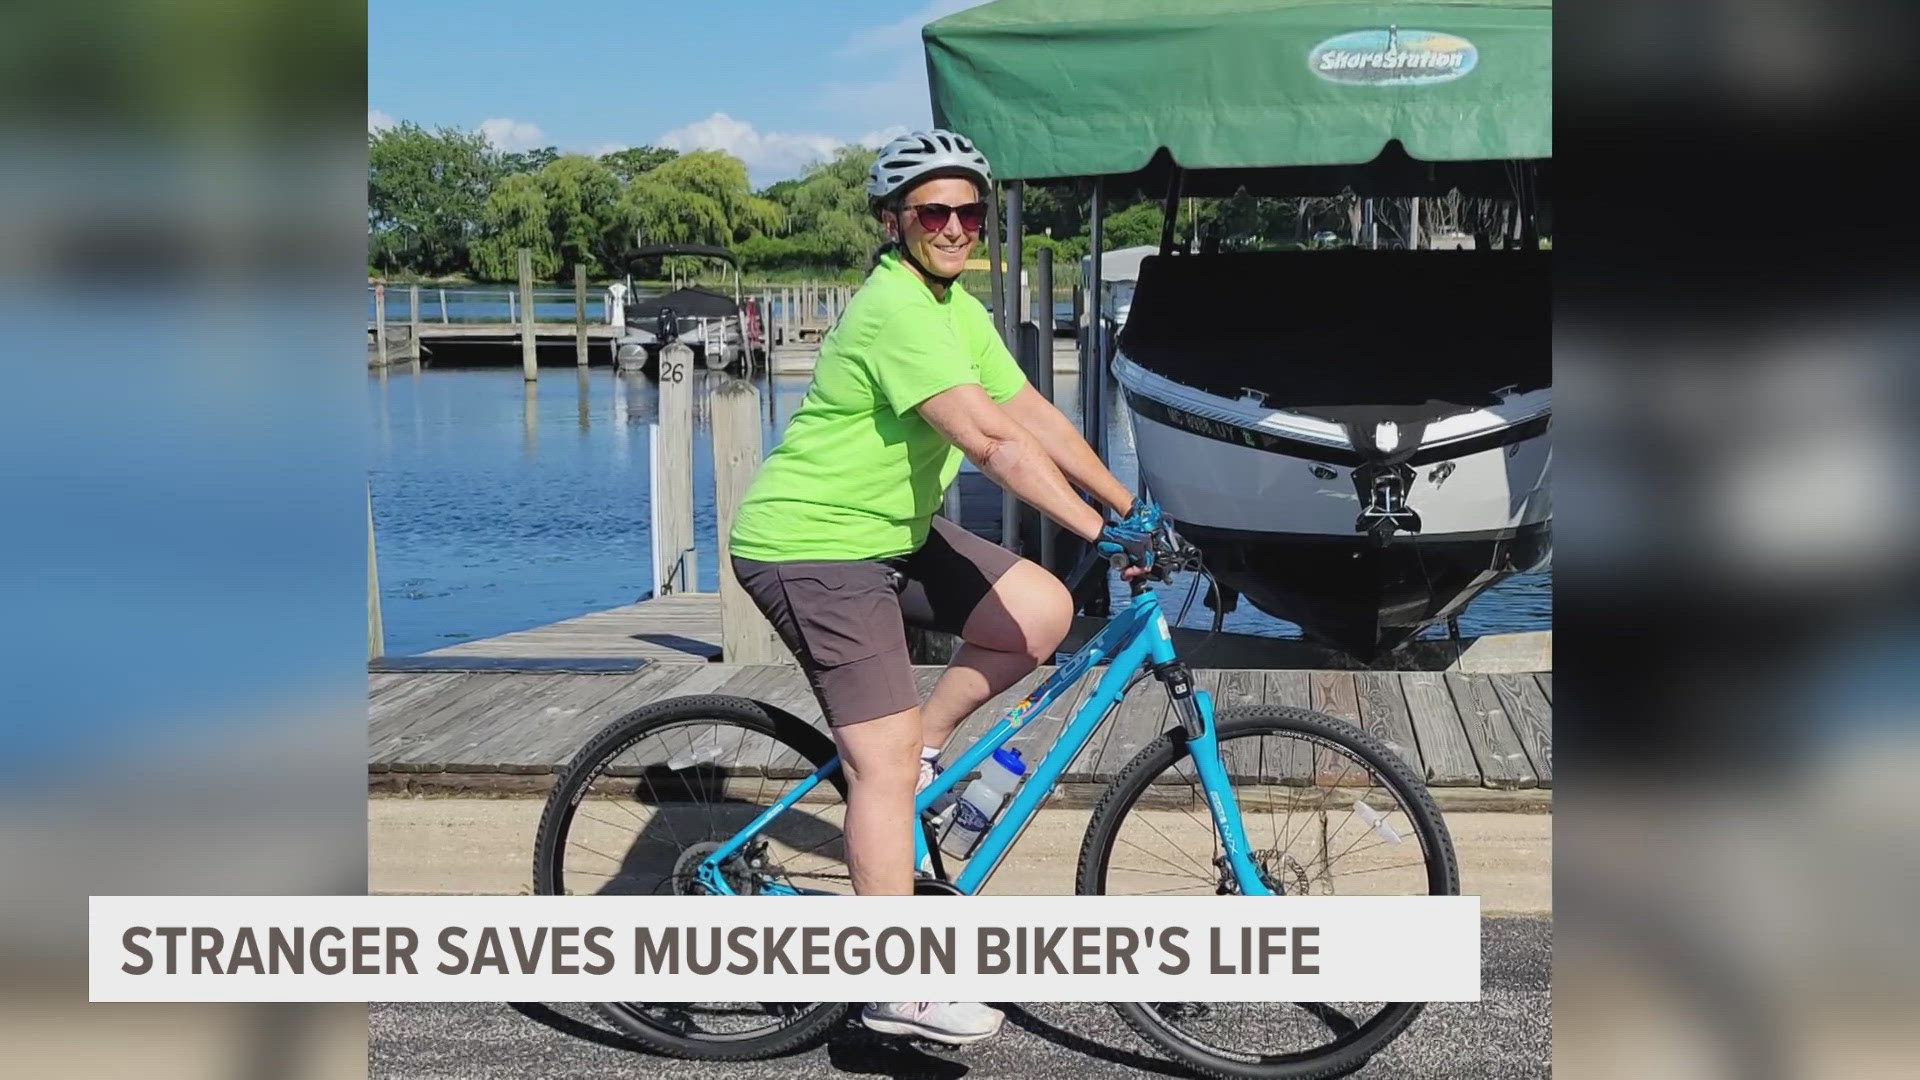 A woman who fell off her bike on Lakeshore Drive in Muskegon is searching for the stranger that helped save her life by calling 911.